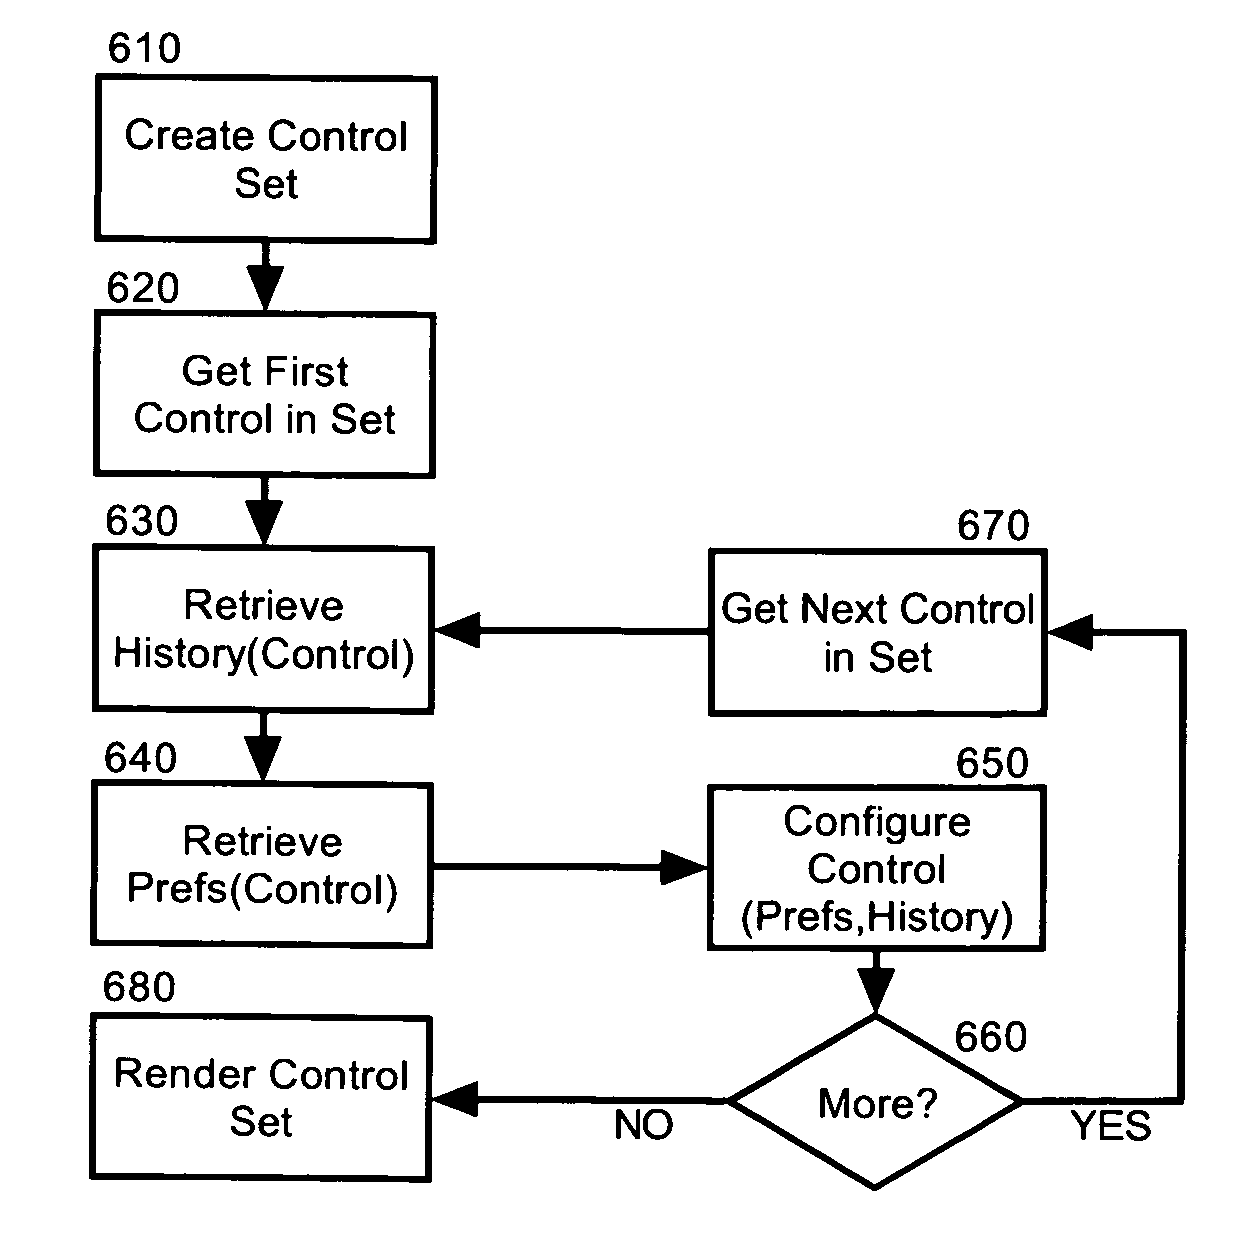 Displaying dynamic graphical content in graphical user interface (GUI) controls